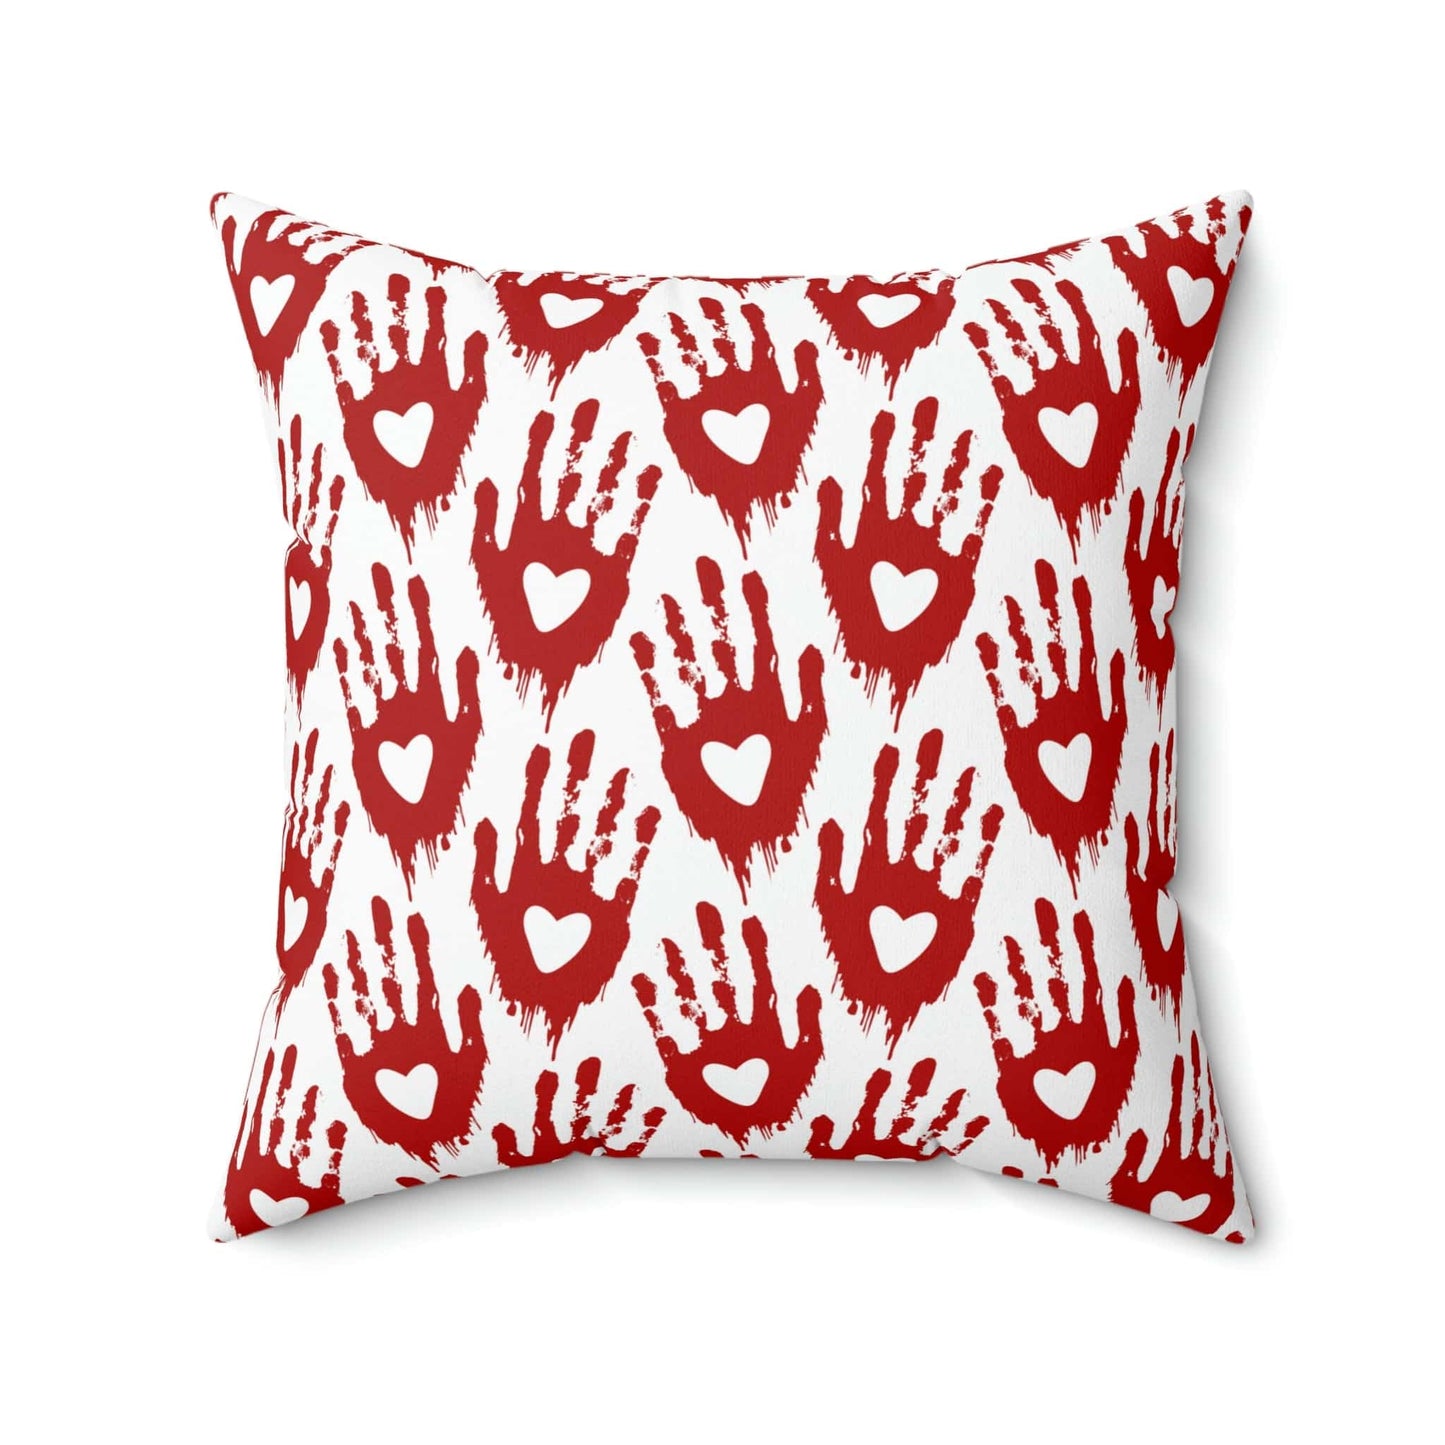 Kate McEnroe New York Halloween Pillow Case - Red Heart Hand Pattern Throw Pillow Covers